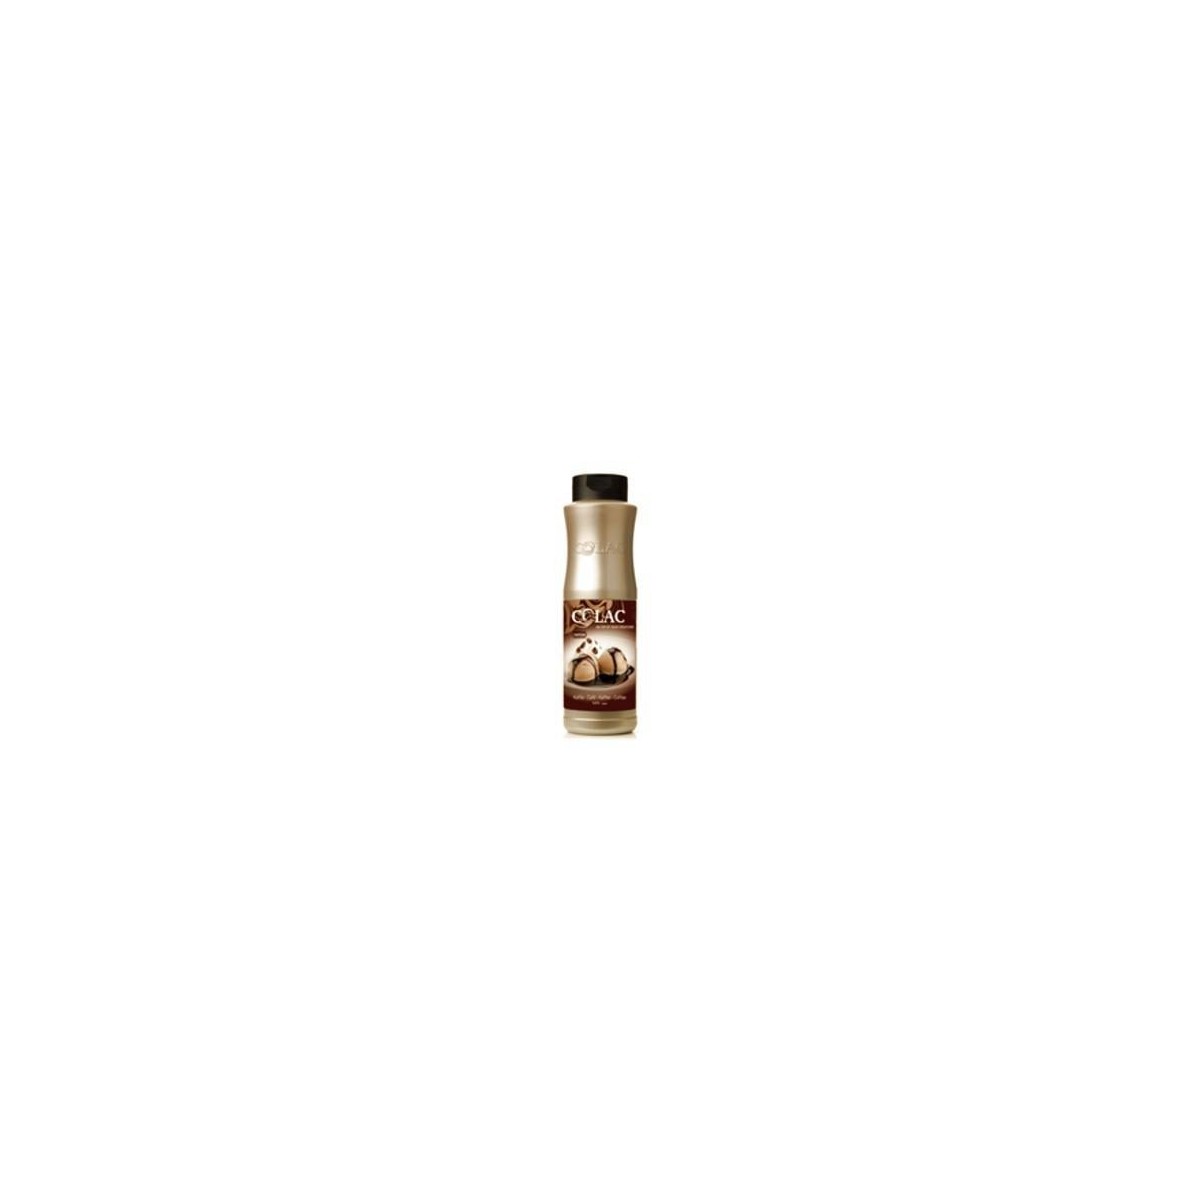 COLAC TOPPING COFFEE BOTTLE 1KG  BOTTLE